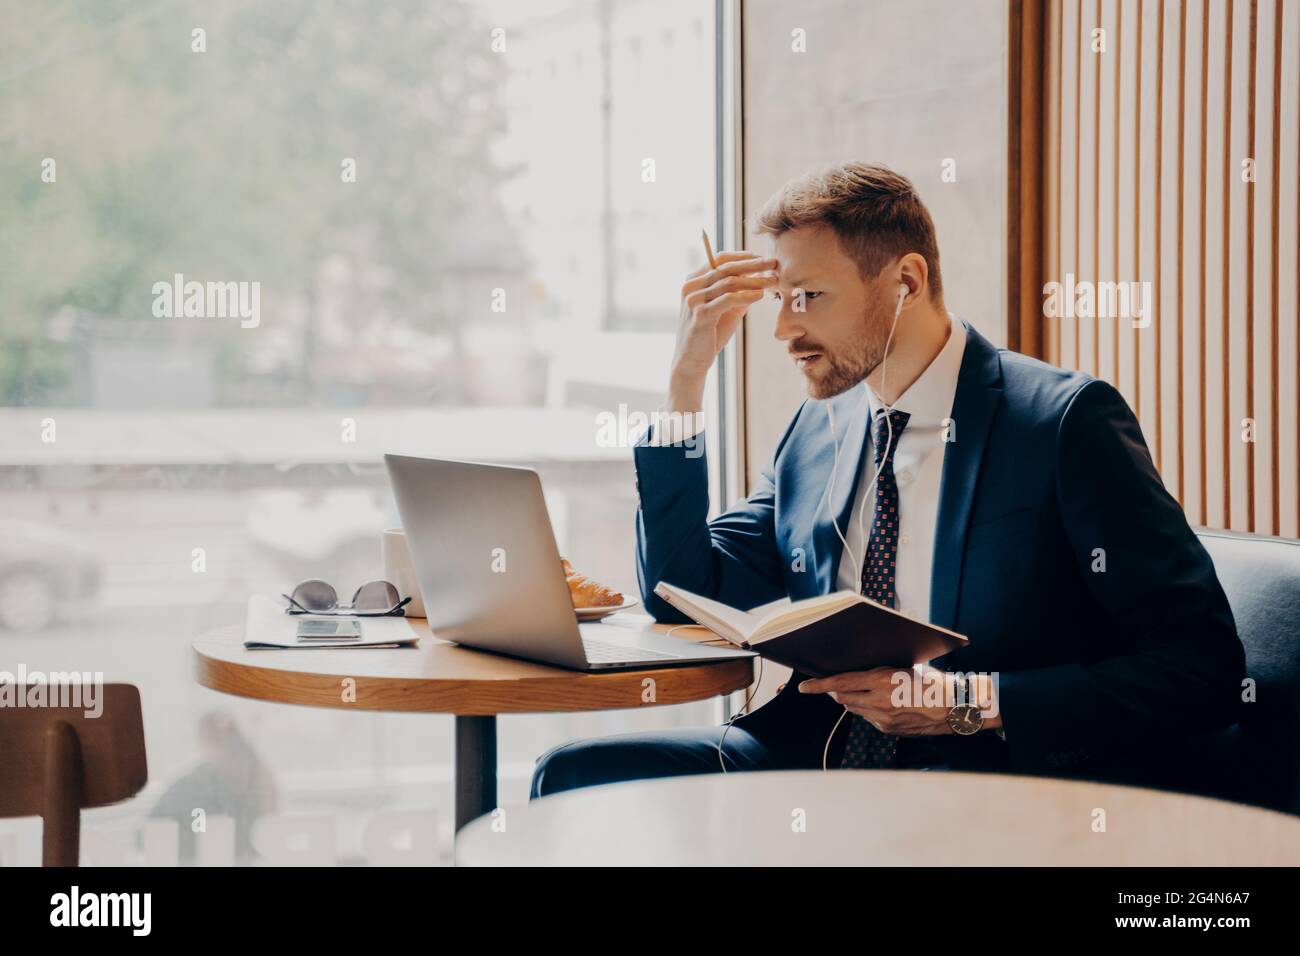 Side photo of successful business person busy working from coffee shop Stock Photo